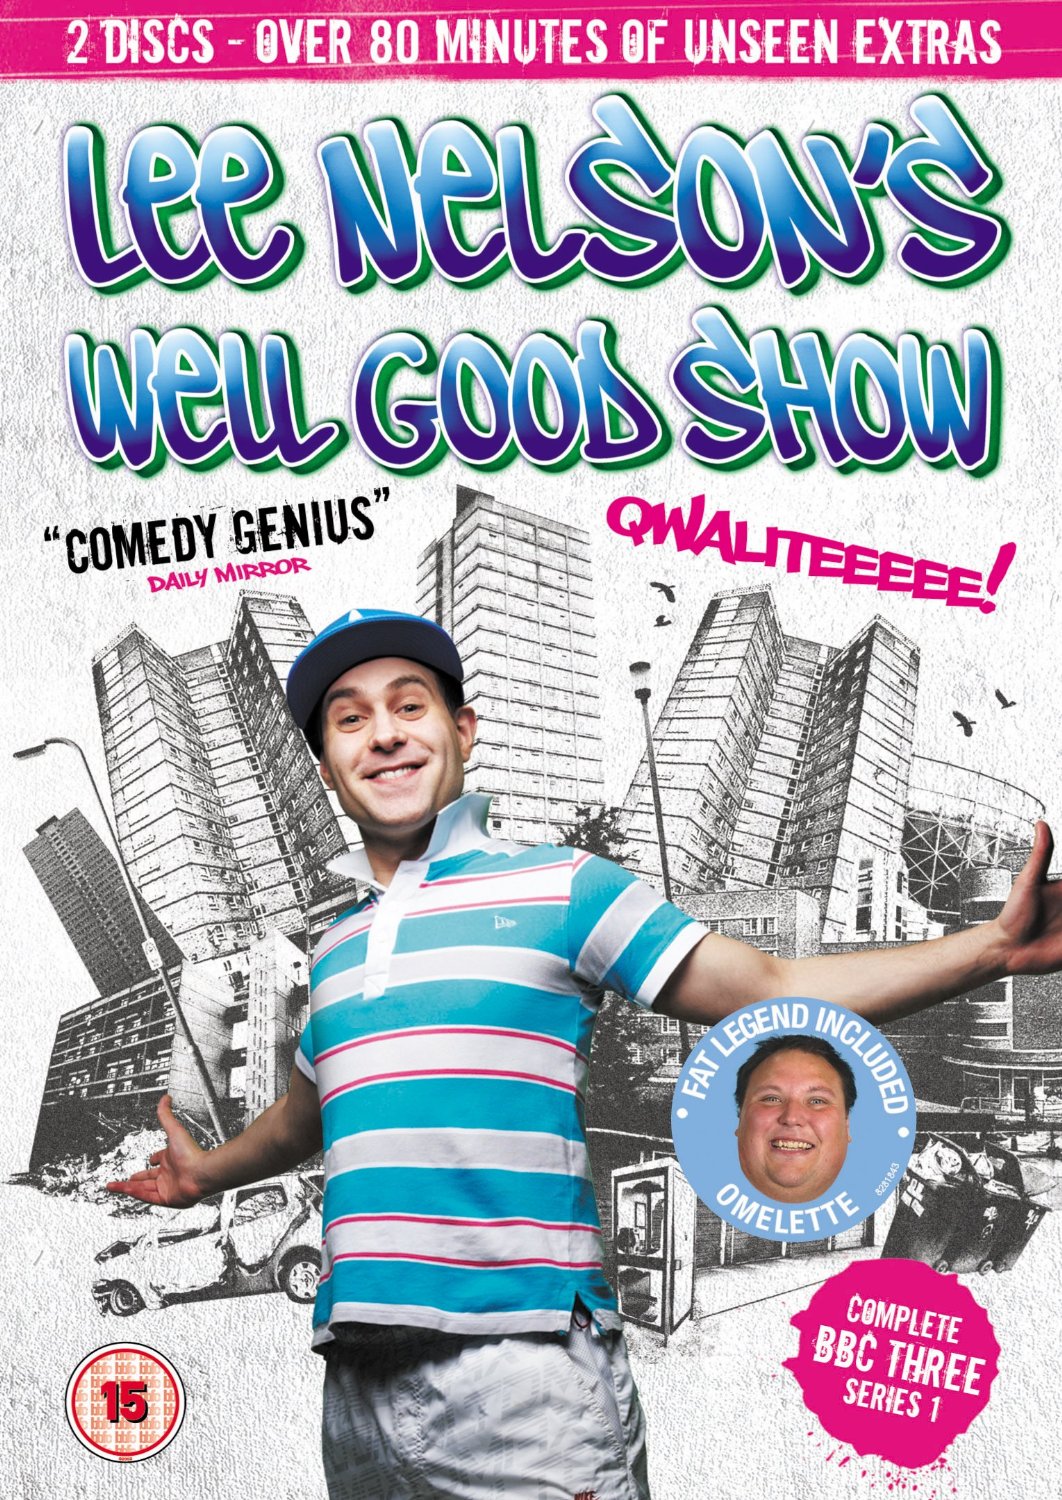 Lee Nelson's Well Good Show (2010)